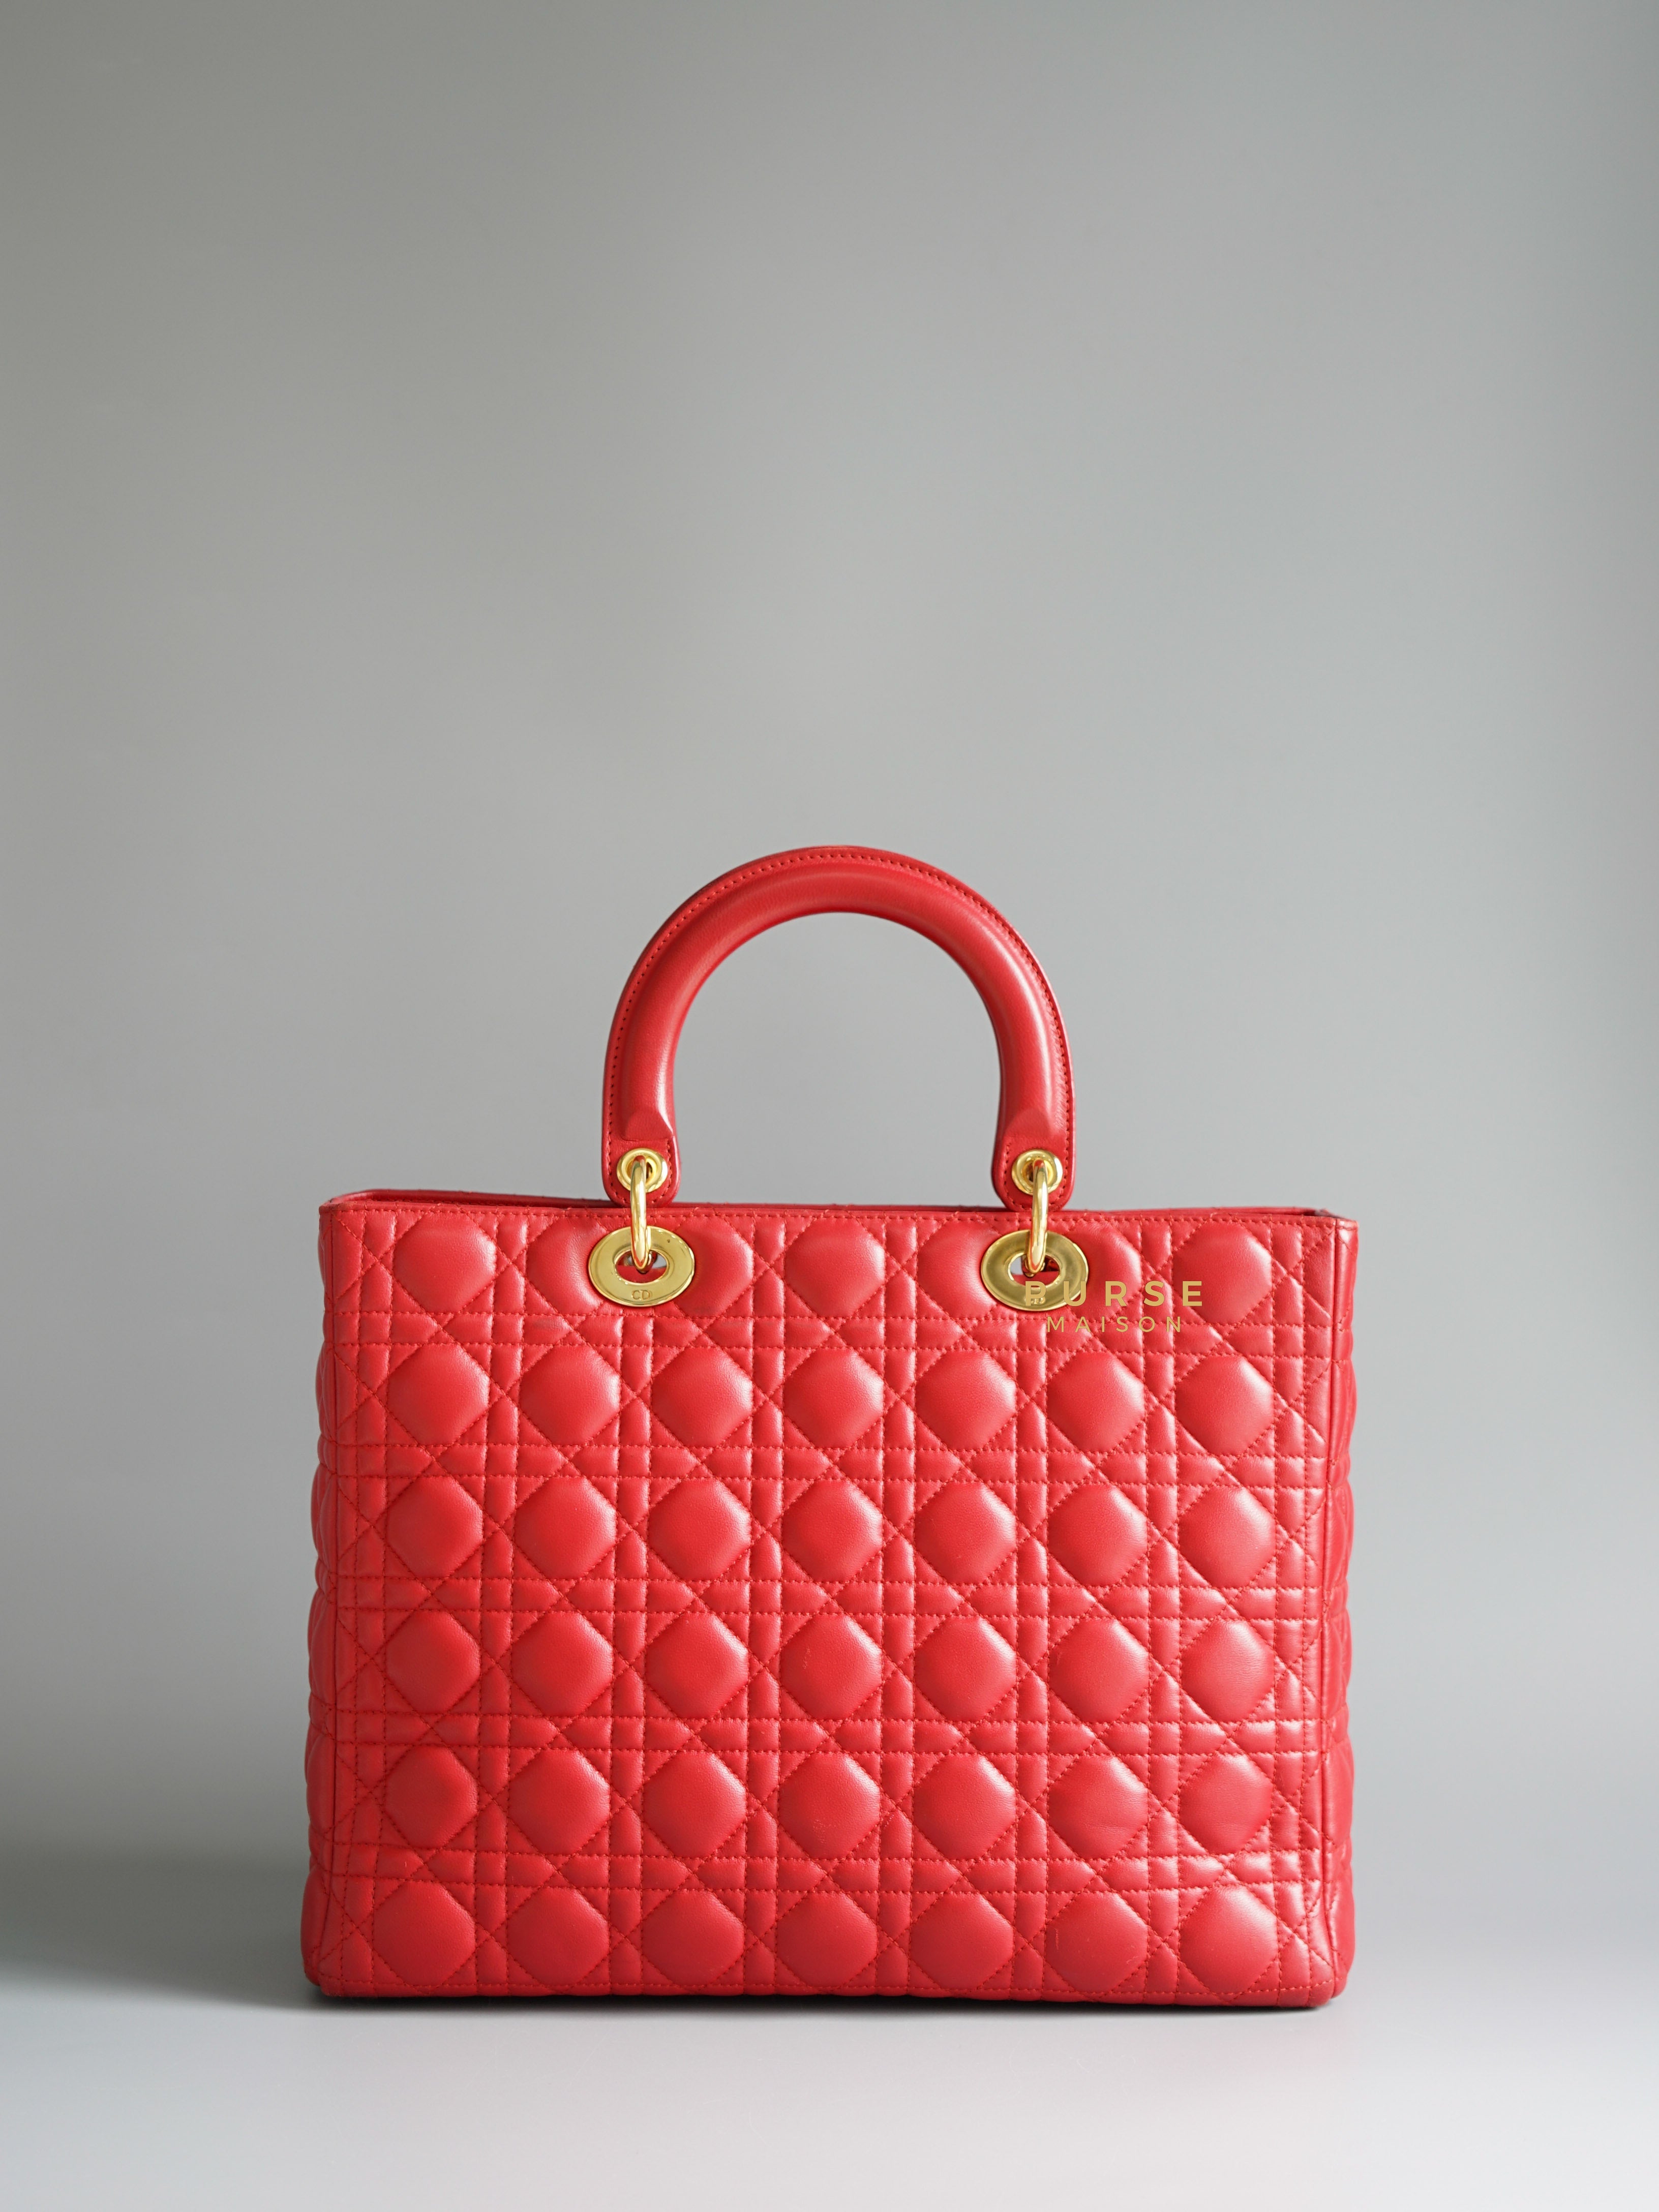 Christian Dior Lady Dior Large Red Cannage Quilt Lambskin Gold Hardware | Purse Maison Luxury Bags Shop